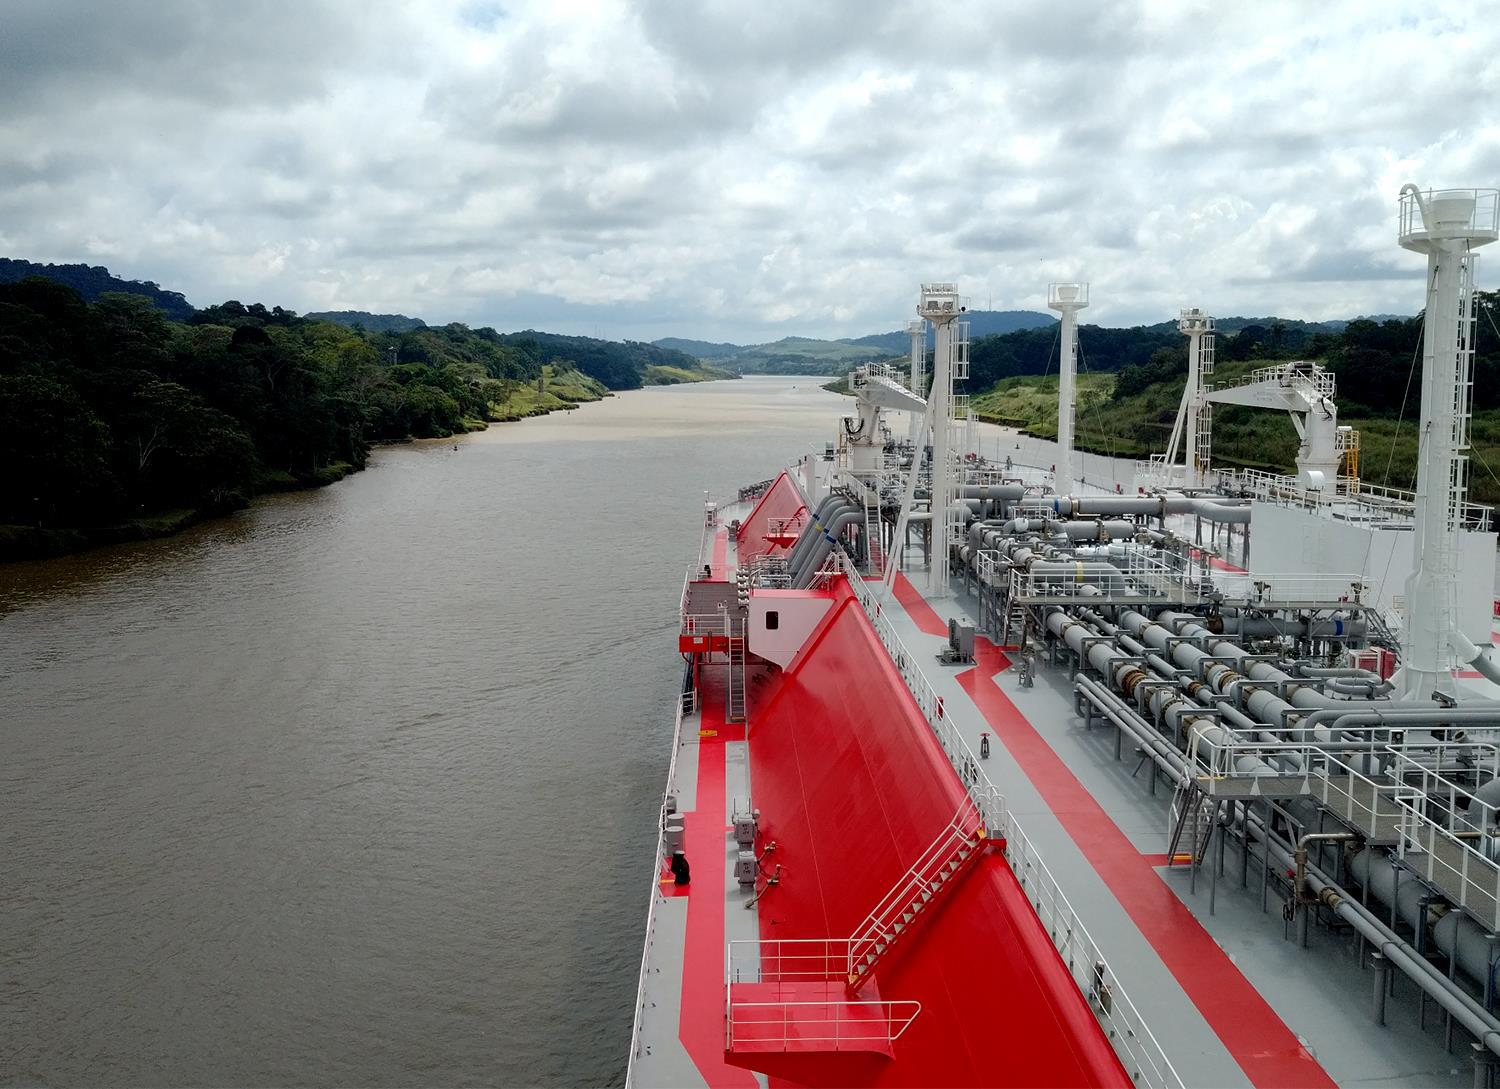 Awilco's LNG tanker hit off Singapore